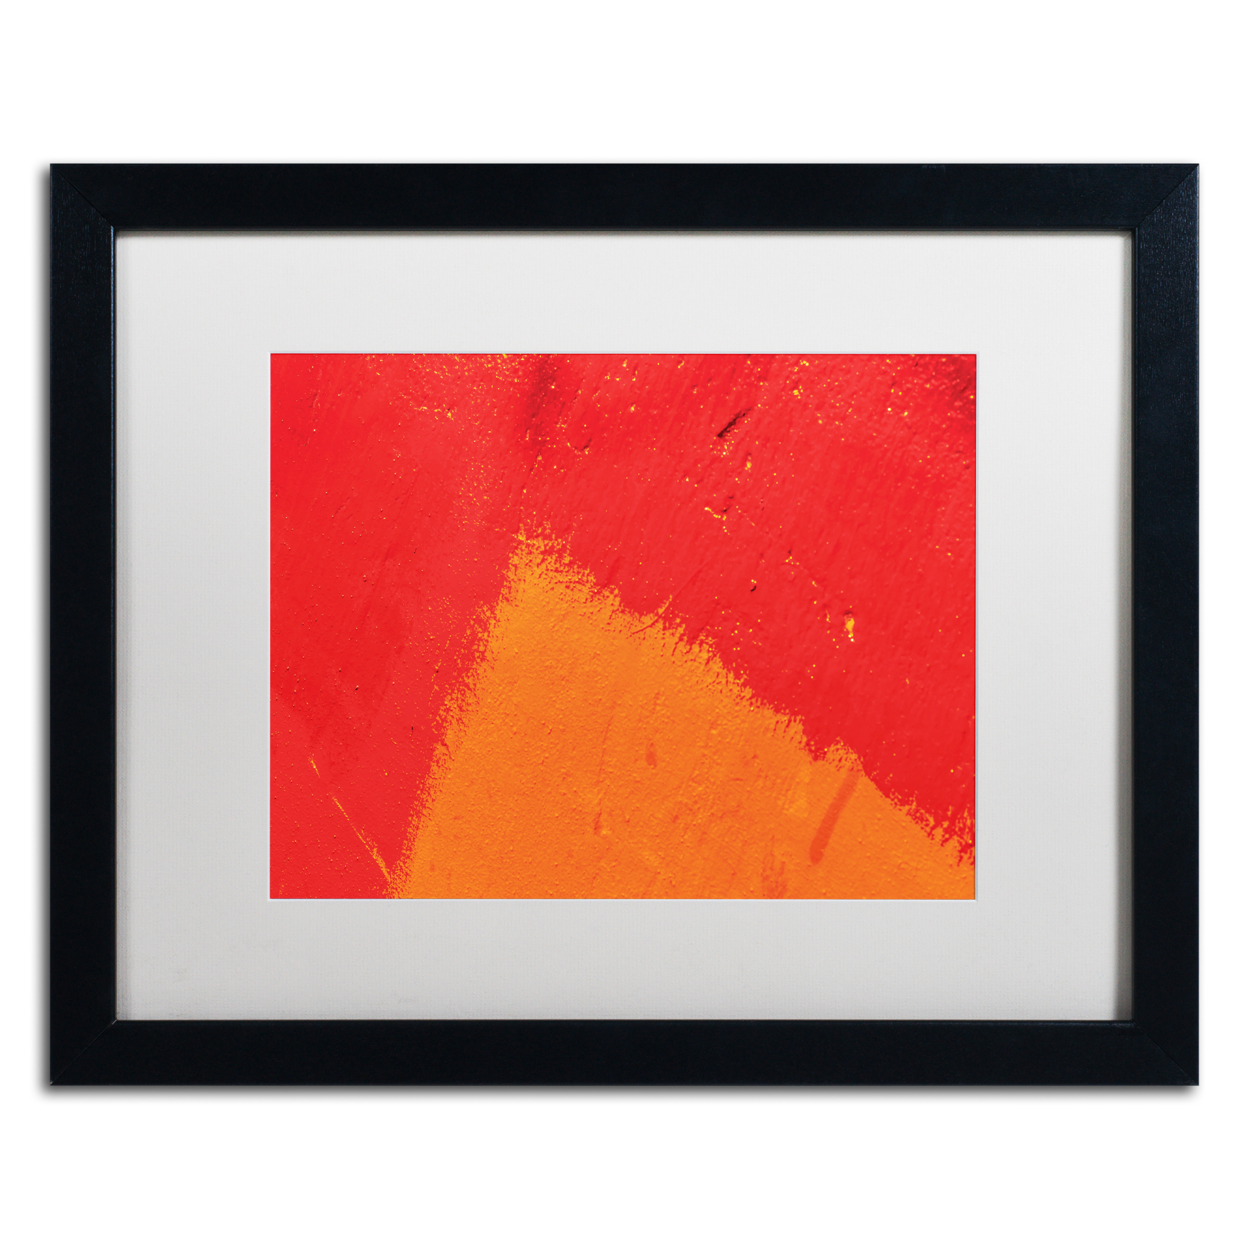 Claire Doherty 'Abstract Orange Triangle' Black Wooden Framed Art 18 X 22 Inches